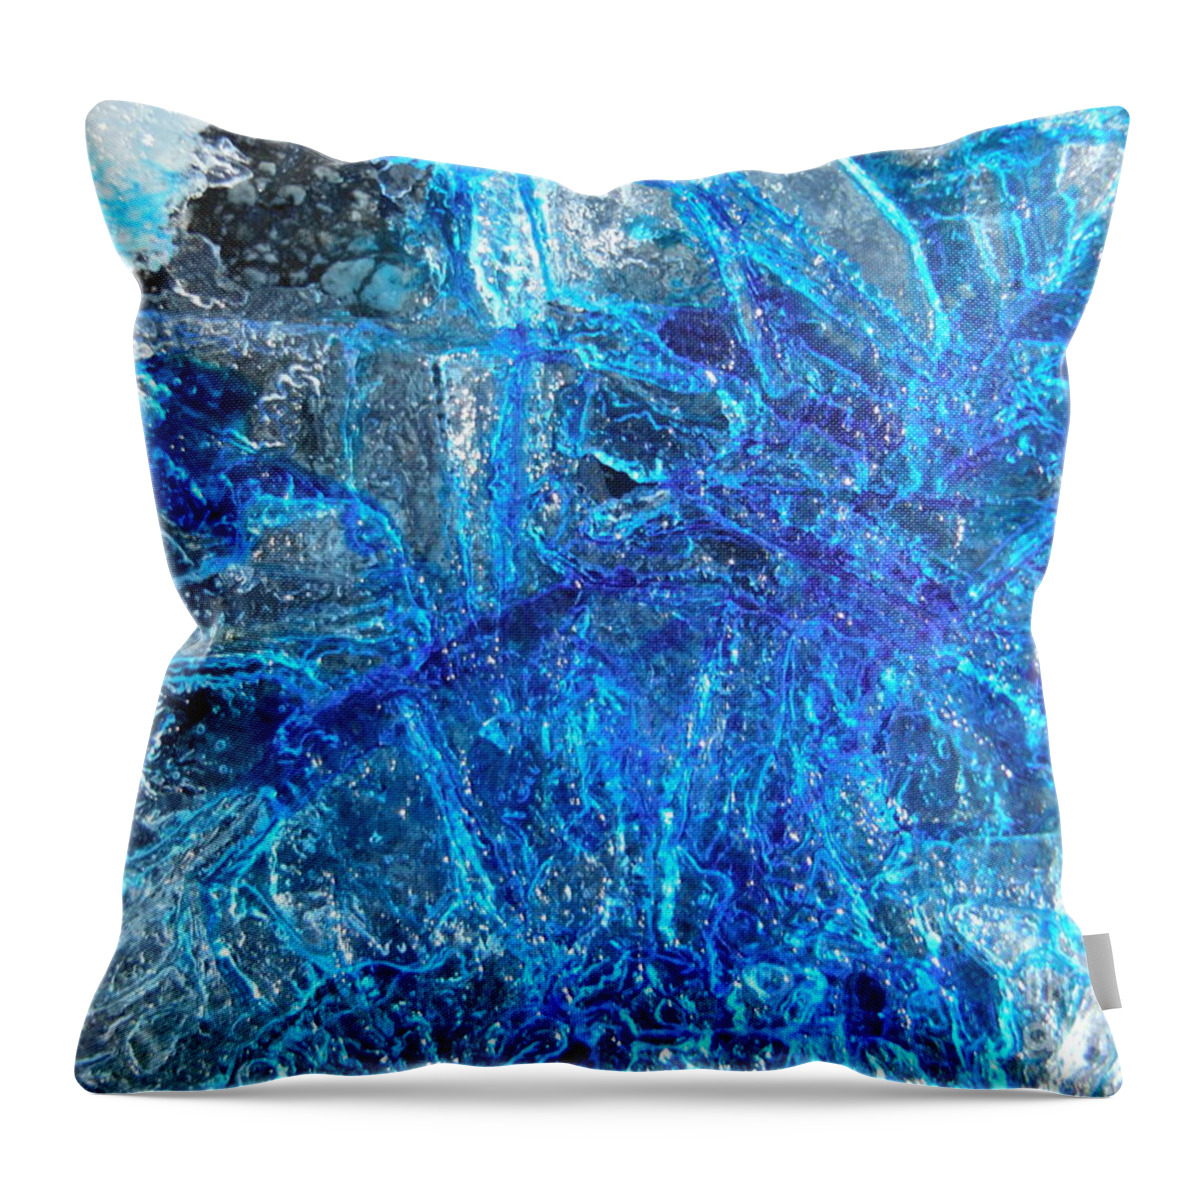 Color In Ice Series Throw Pillow featuring the photograph Color In Ice Series 50 by Paddy Shaffer